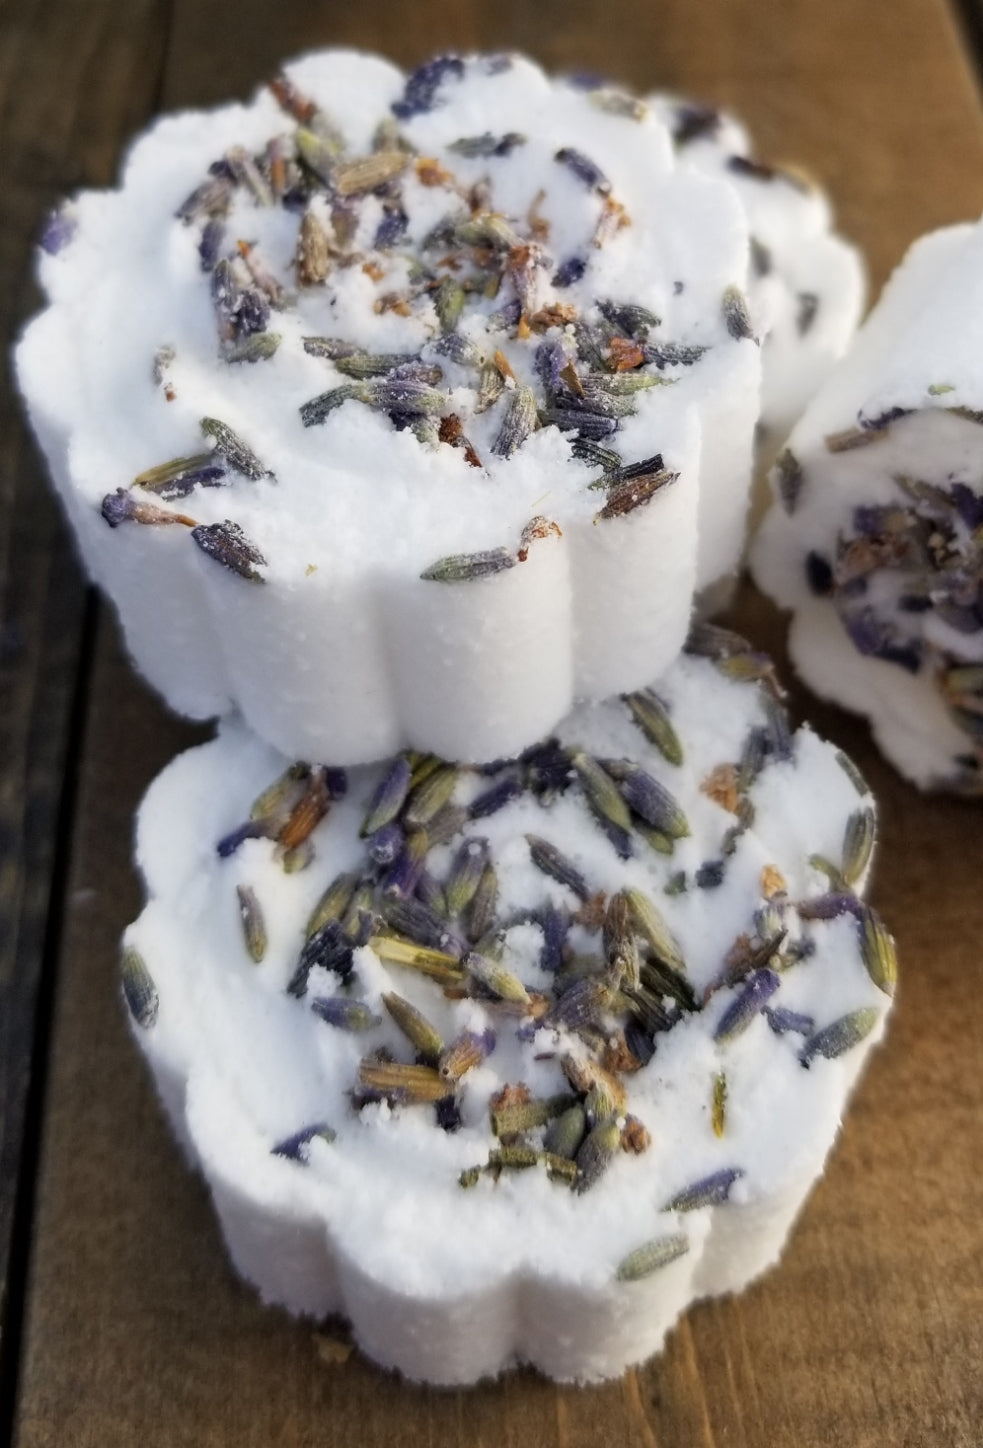 Shower Steamers - Willowisp Apothecary 